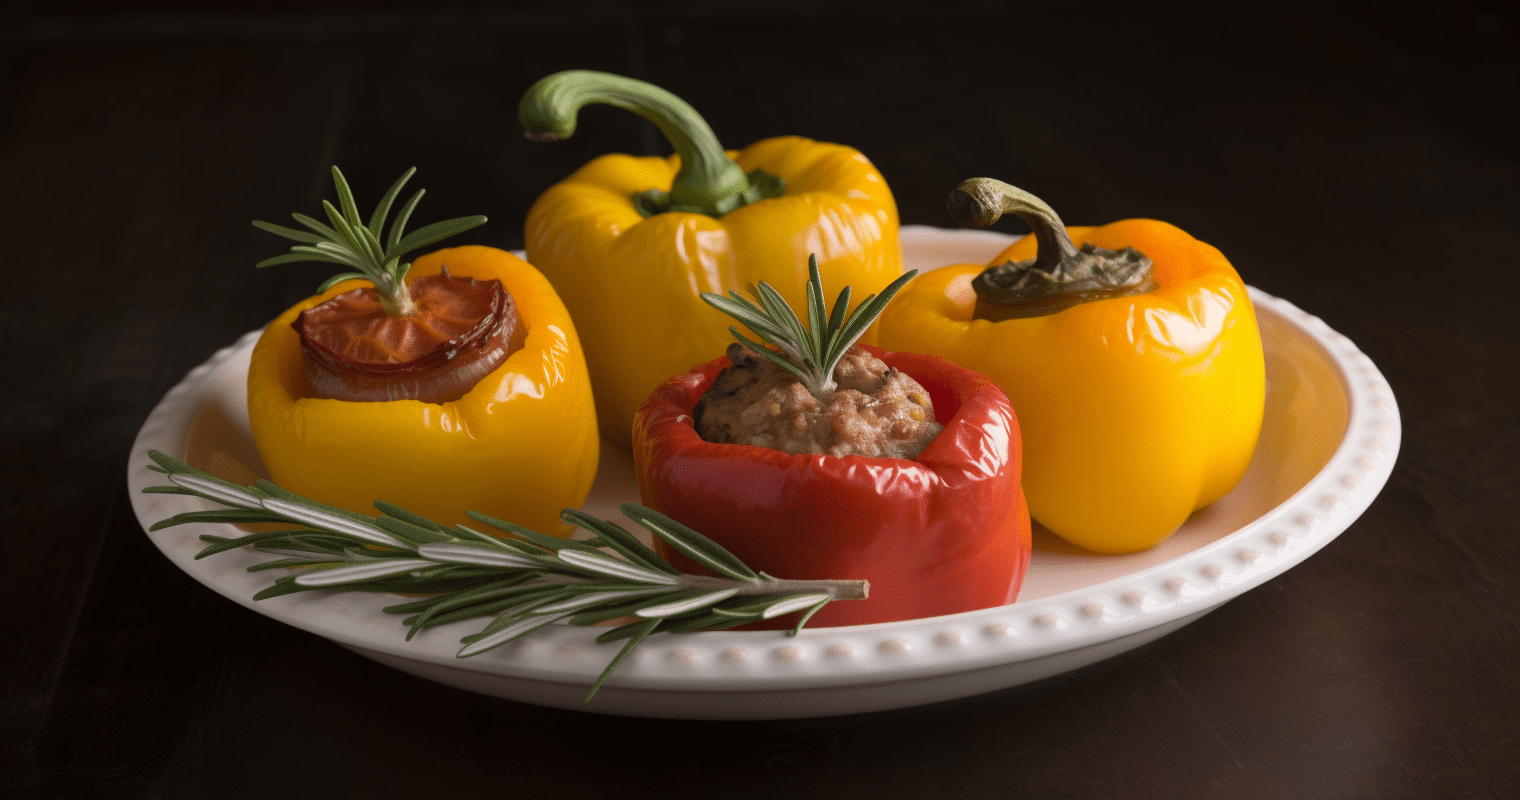 Experience a Taste of History with Sausage and Apple Stuffed Bell Peppers